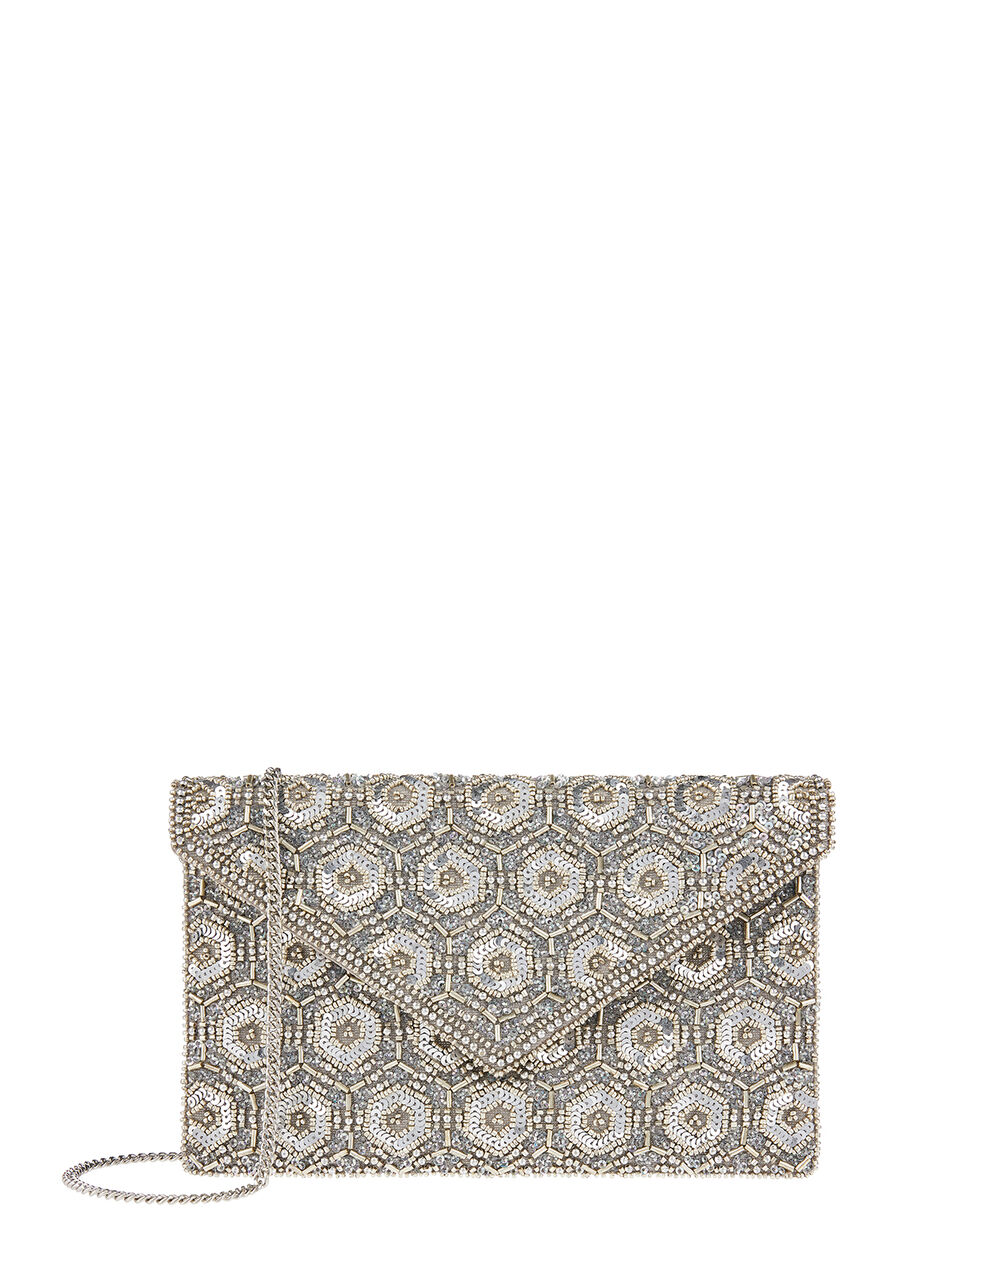 monsoon accessorize clutch bags